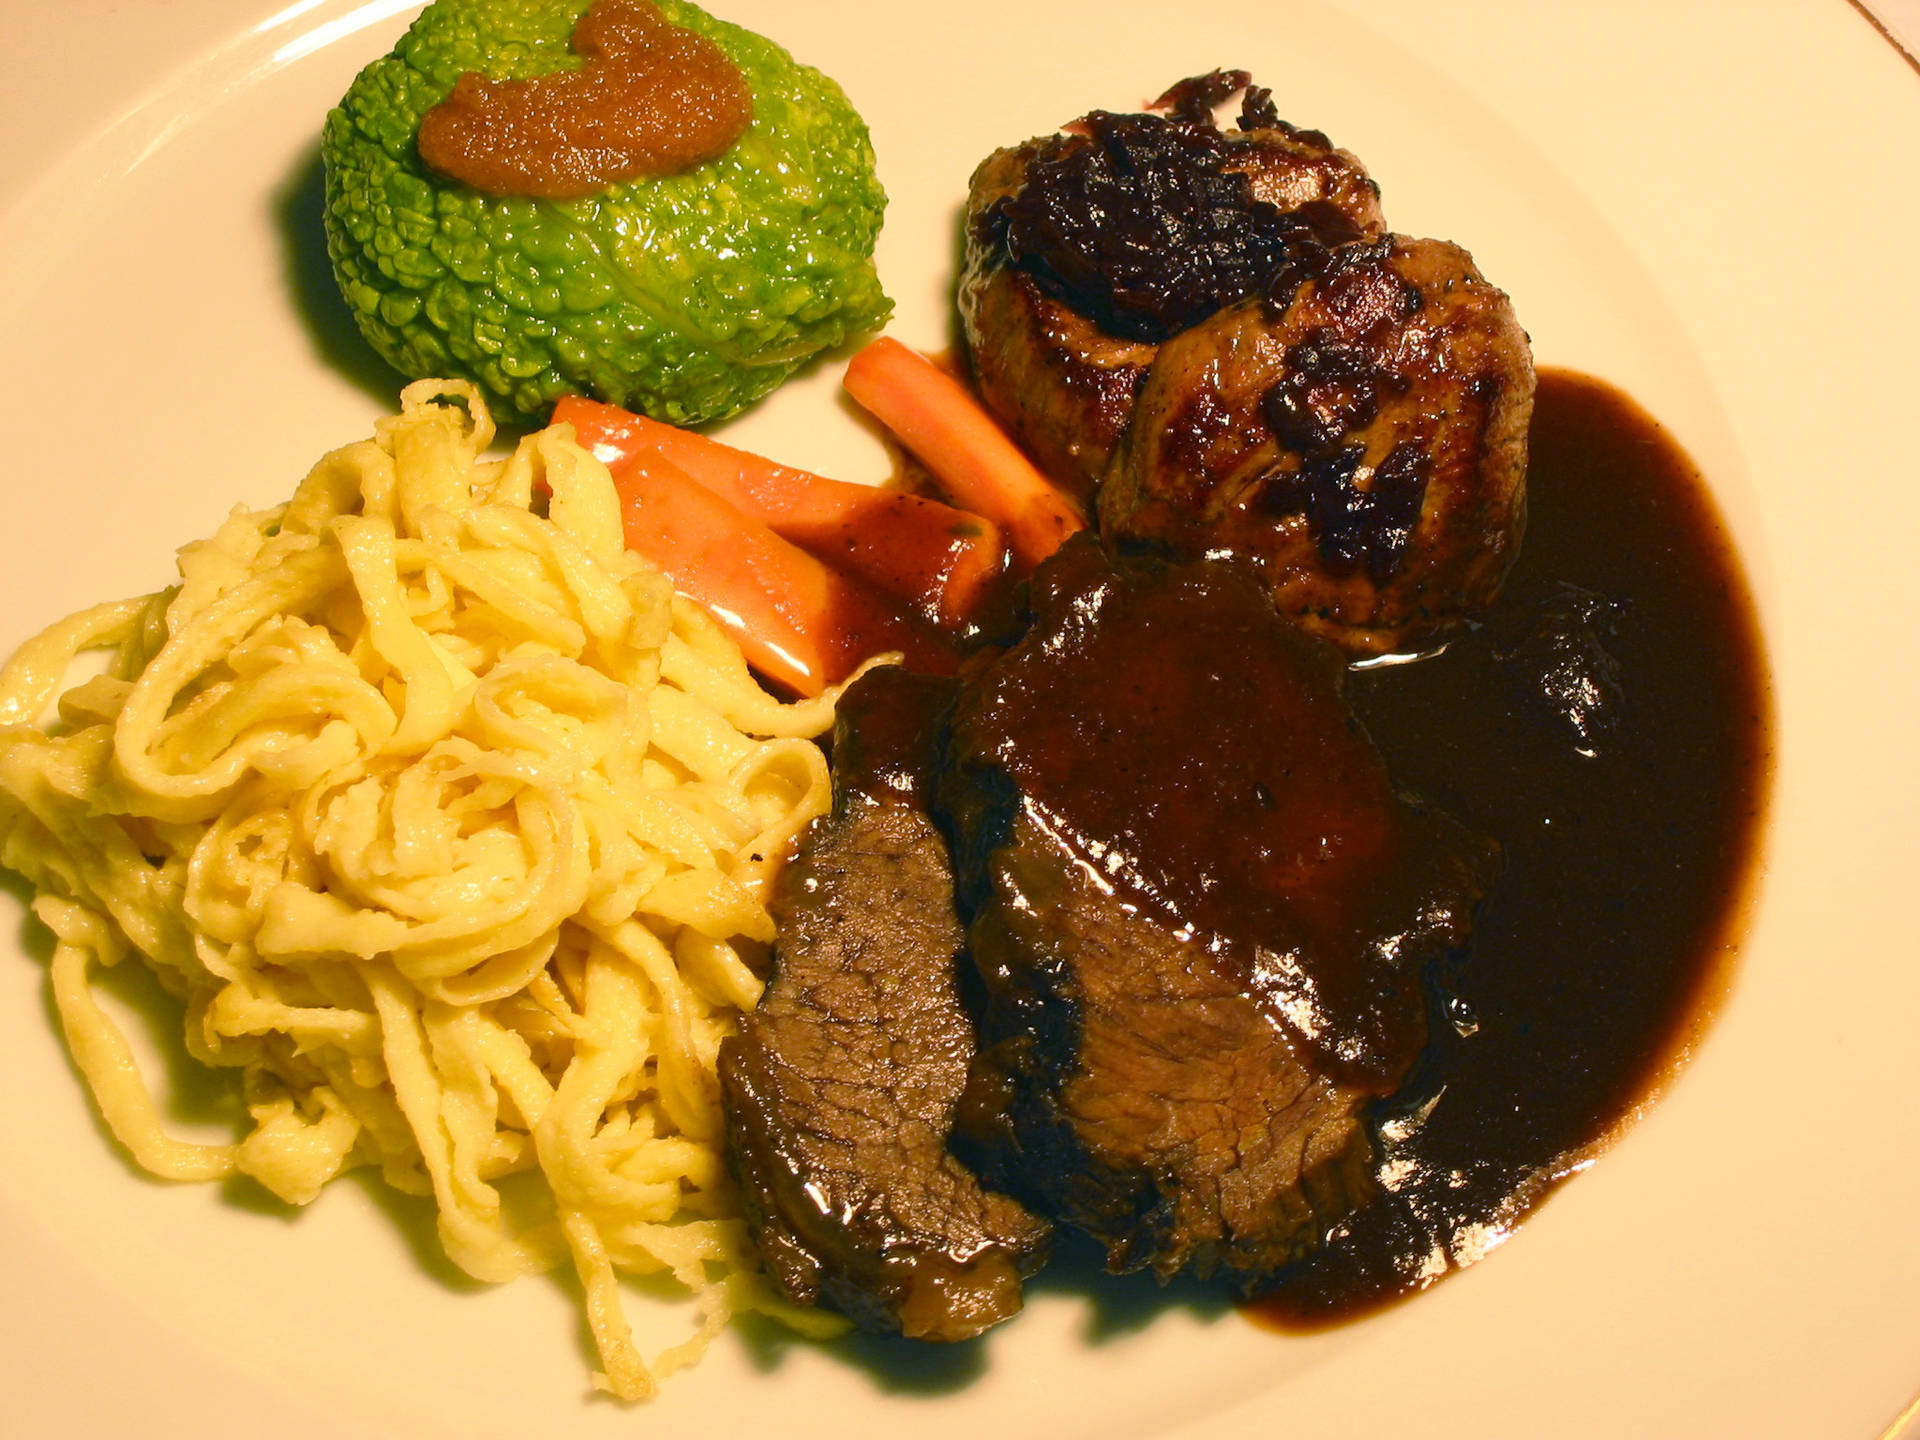 Traditional Sauerbraten Dish Served with Pasta and Mashed Vegetables Wallpaper